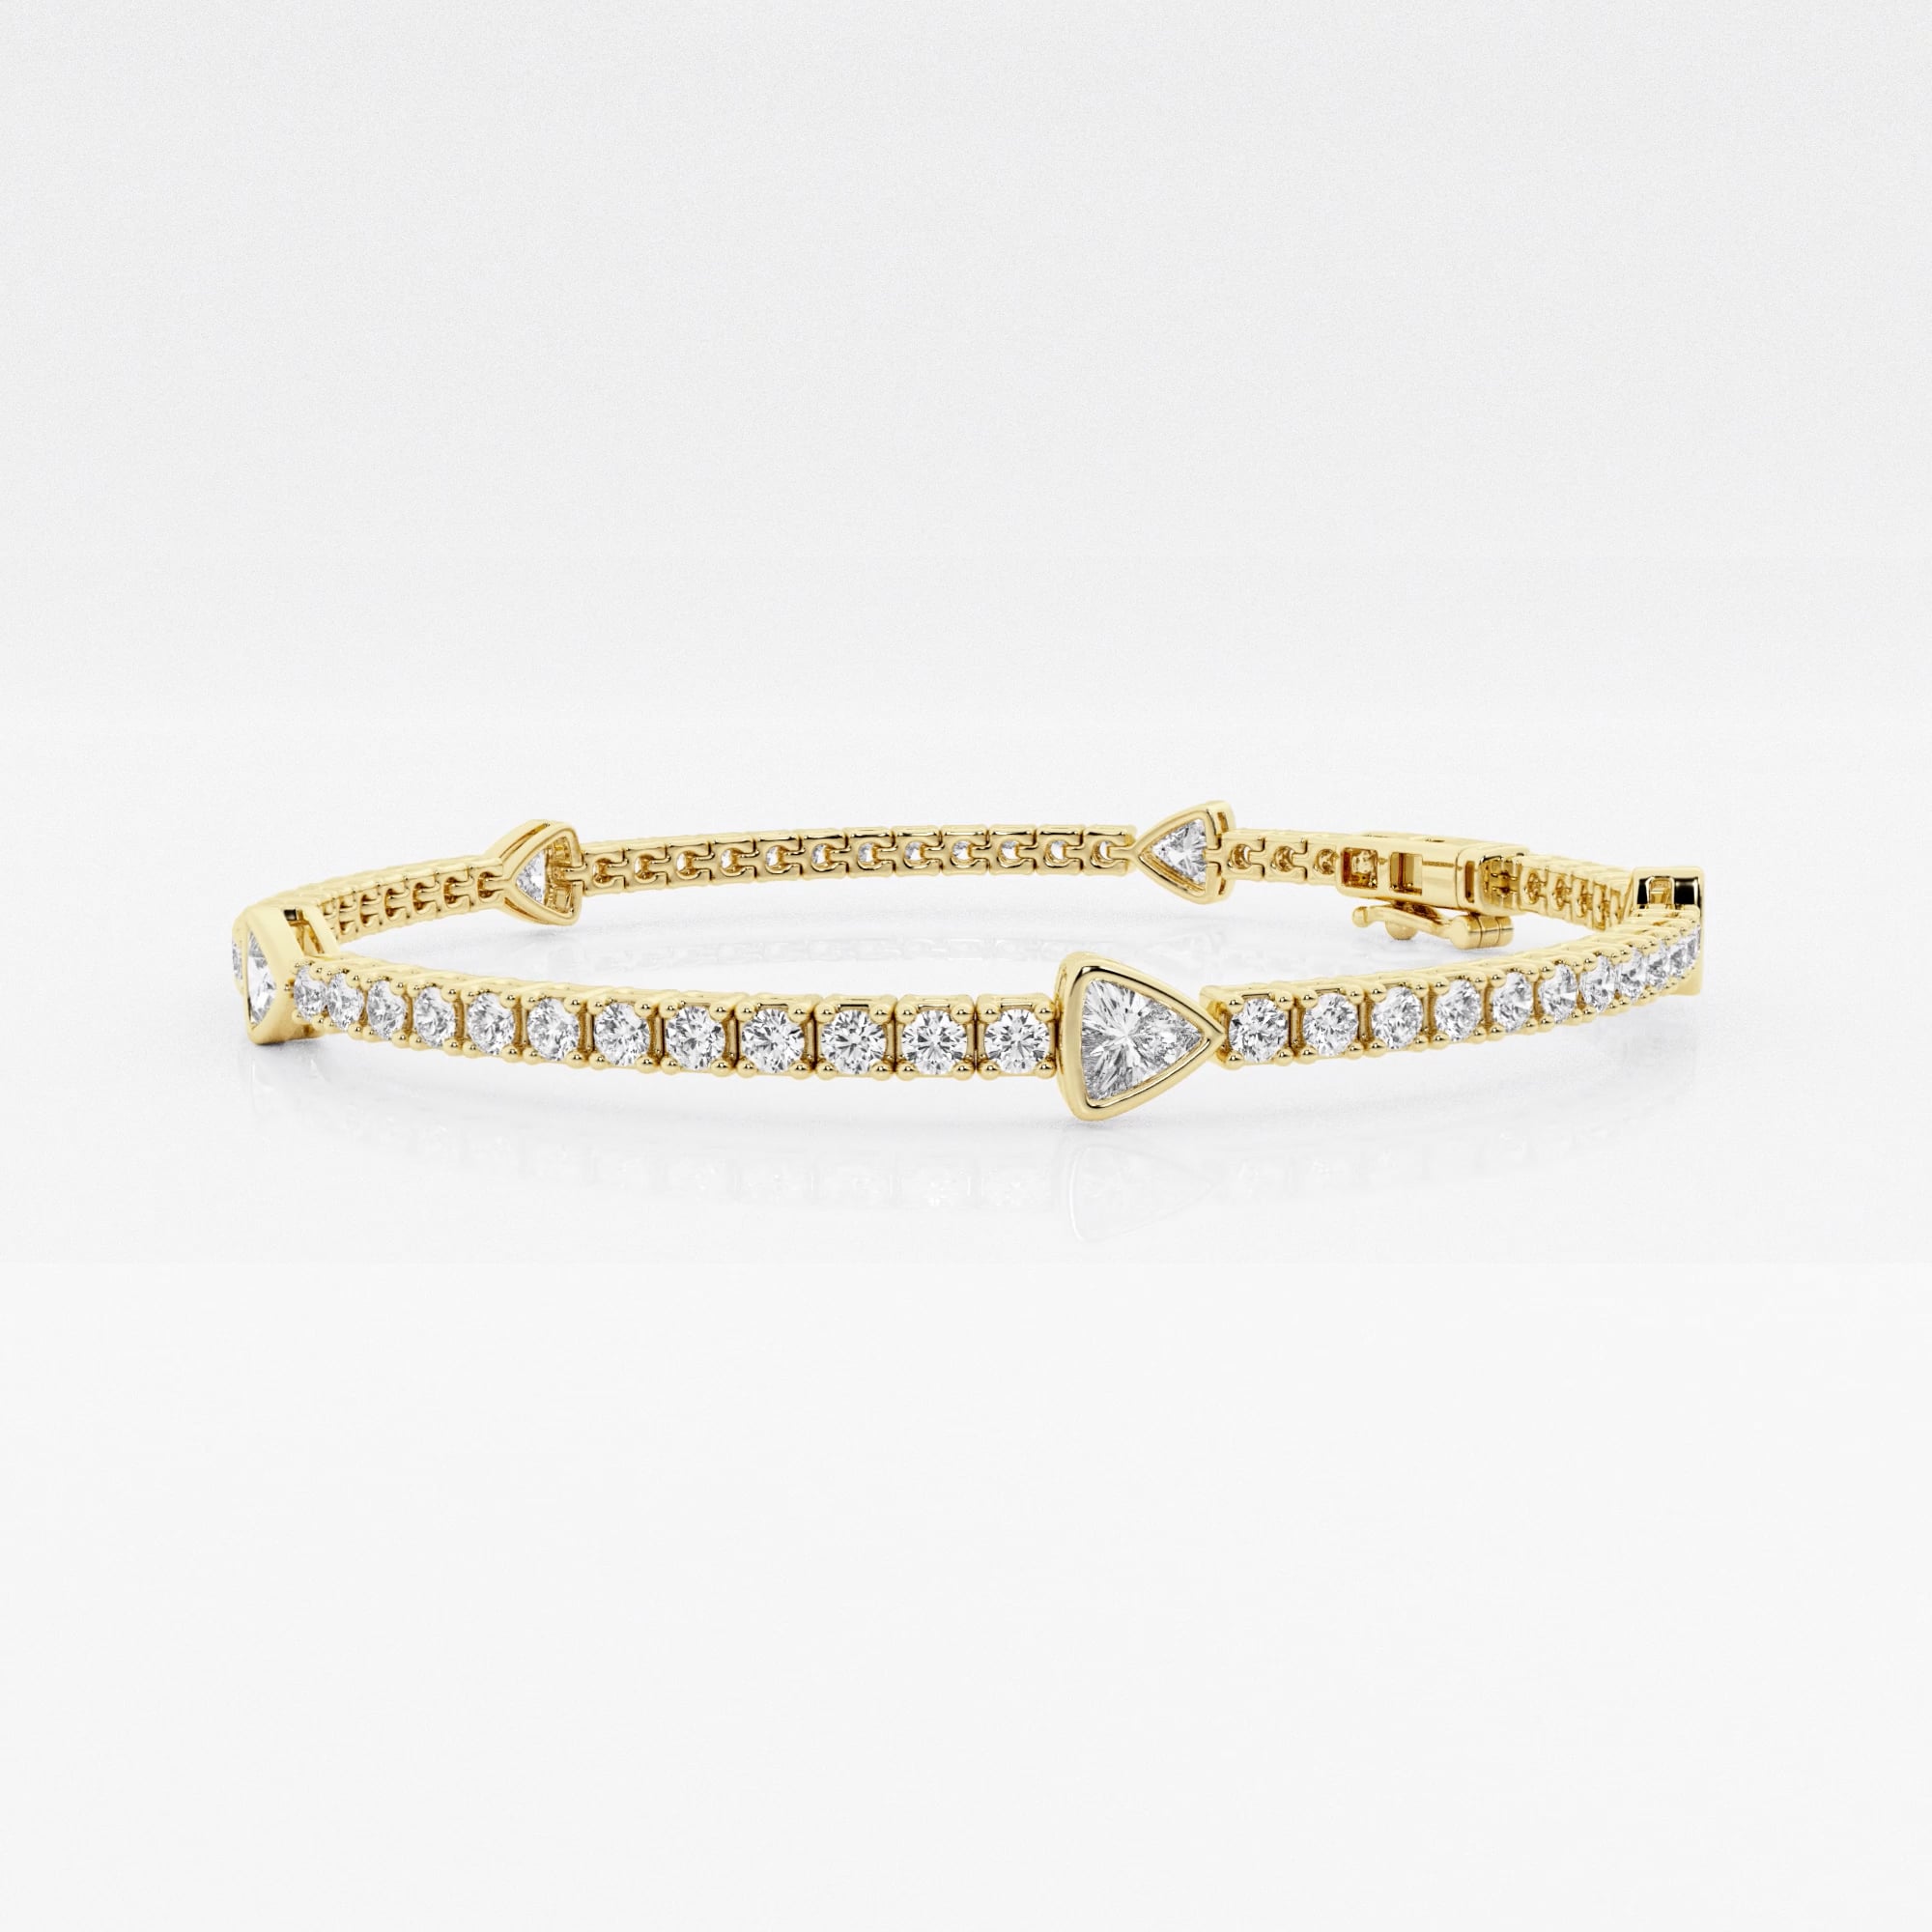 product video for näas Empowering 4 1/2 ctw Trillion Lab Grown Diamond Tennis Bracelet - 7 Inches